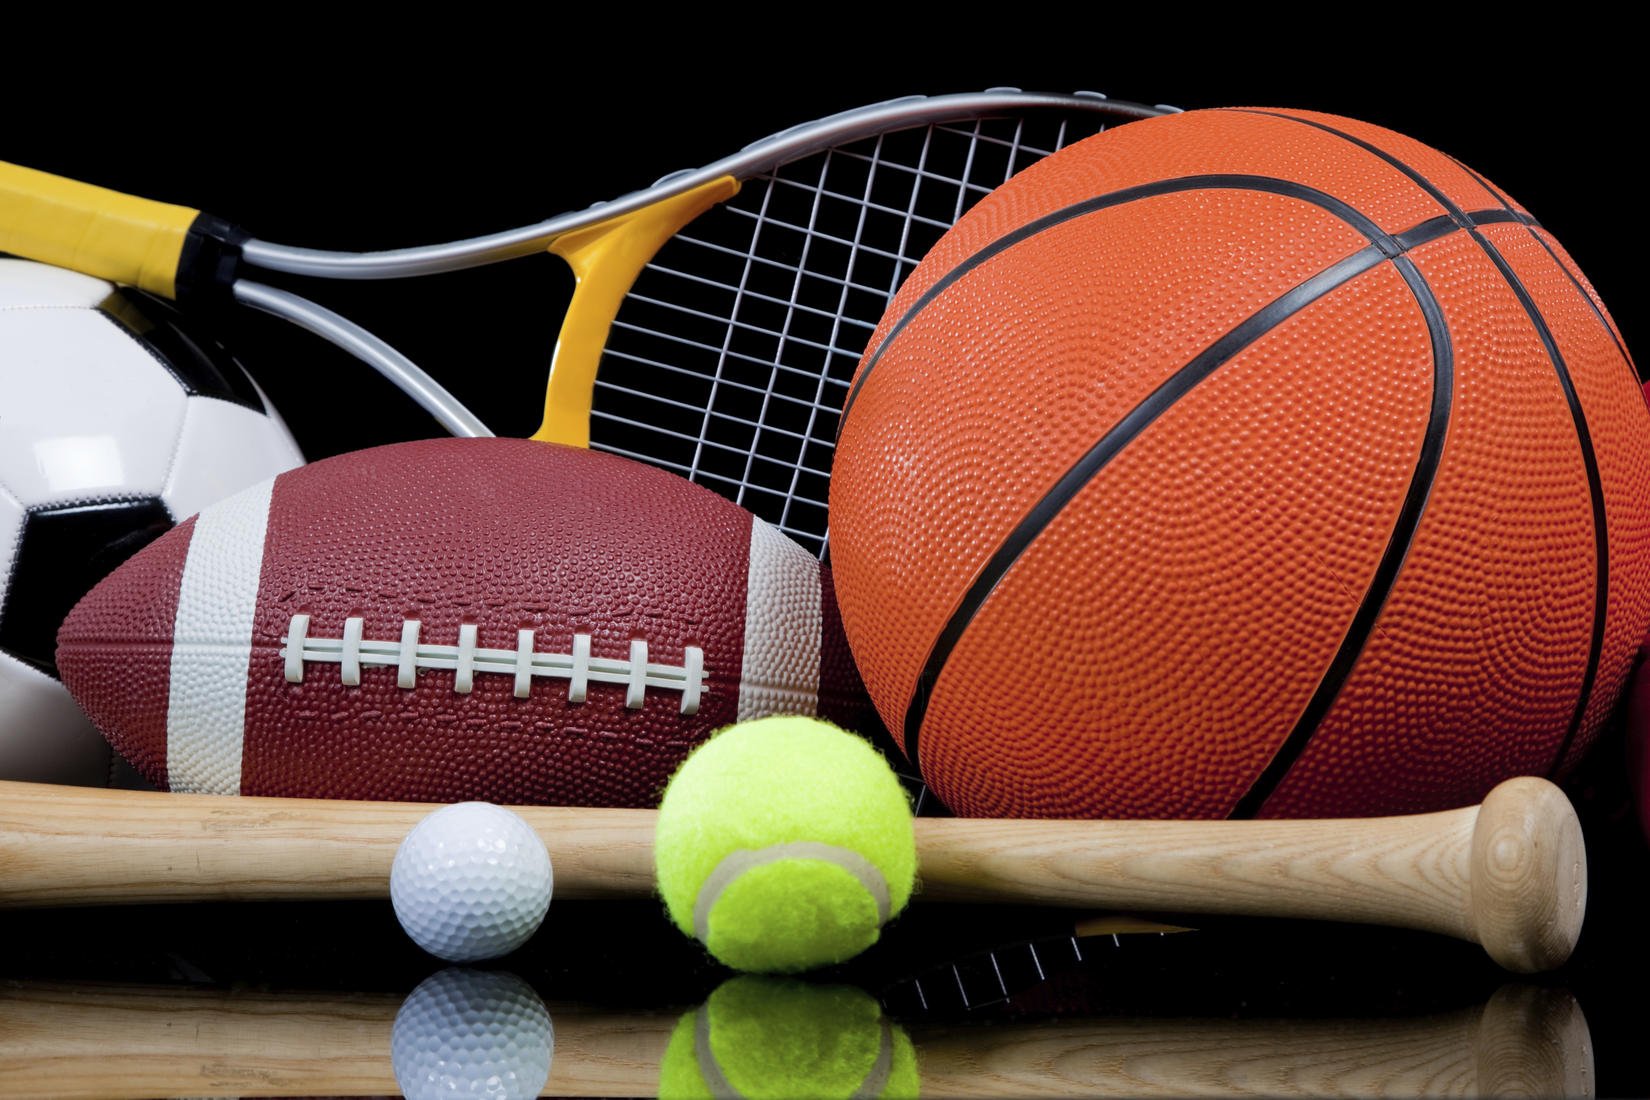 What you need to know about the requirements for sports equipment